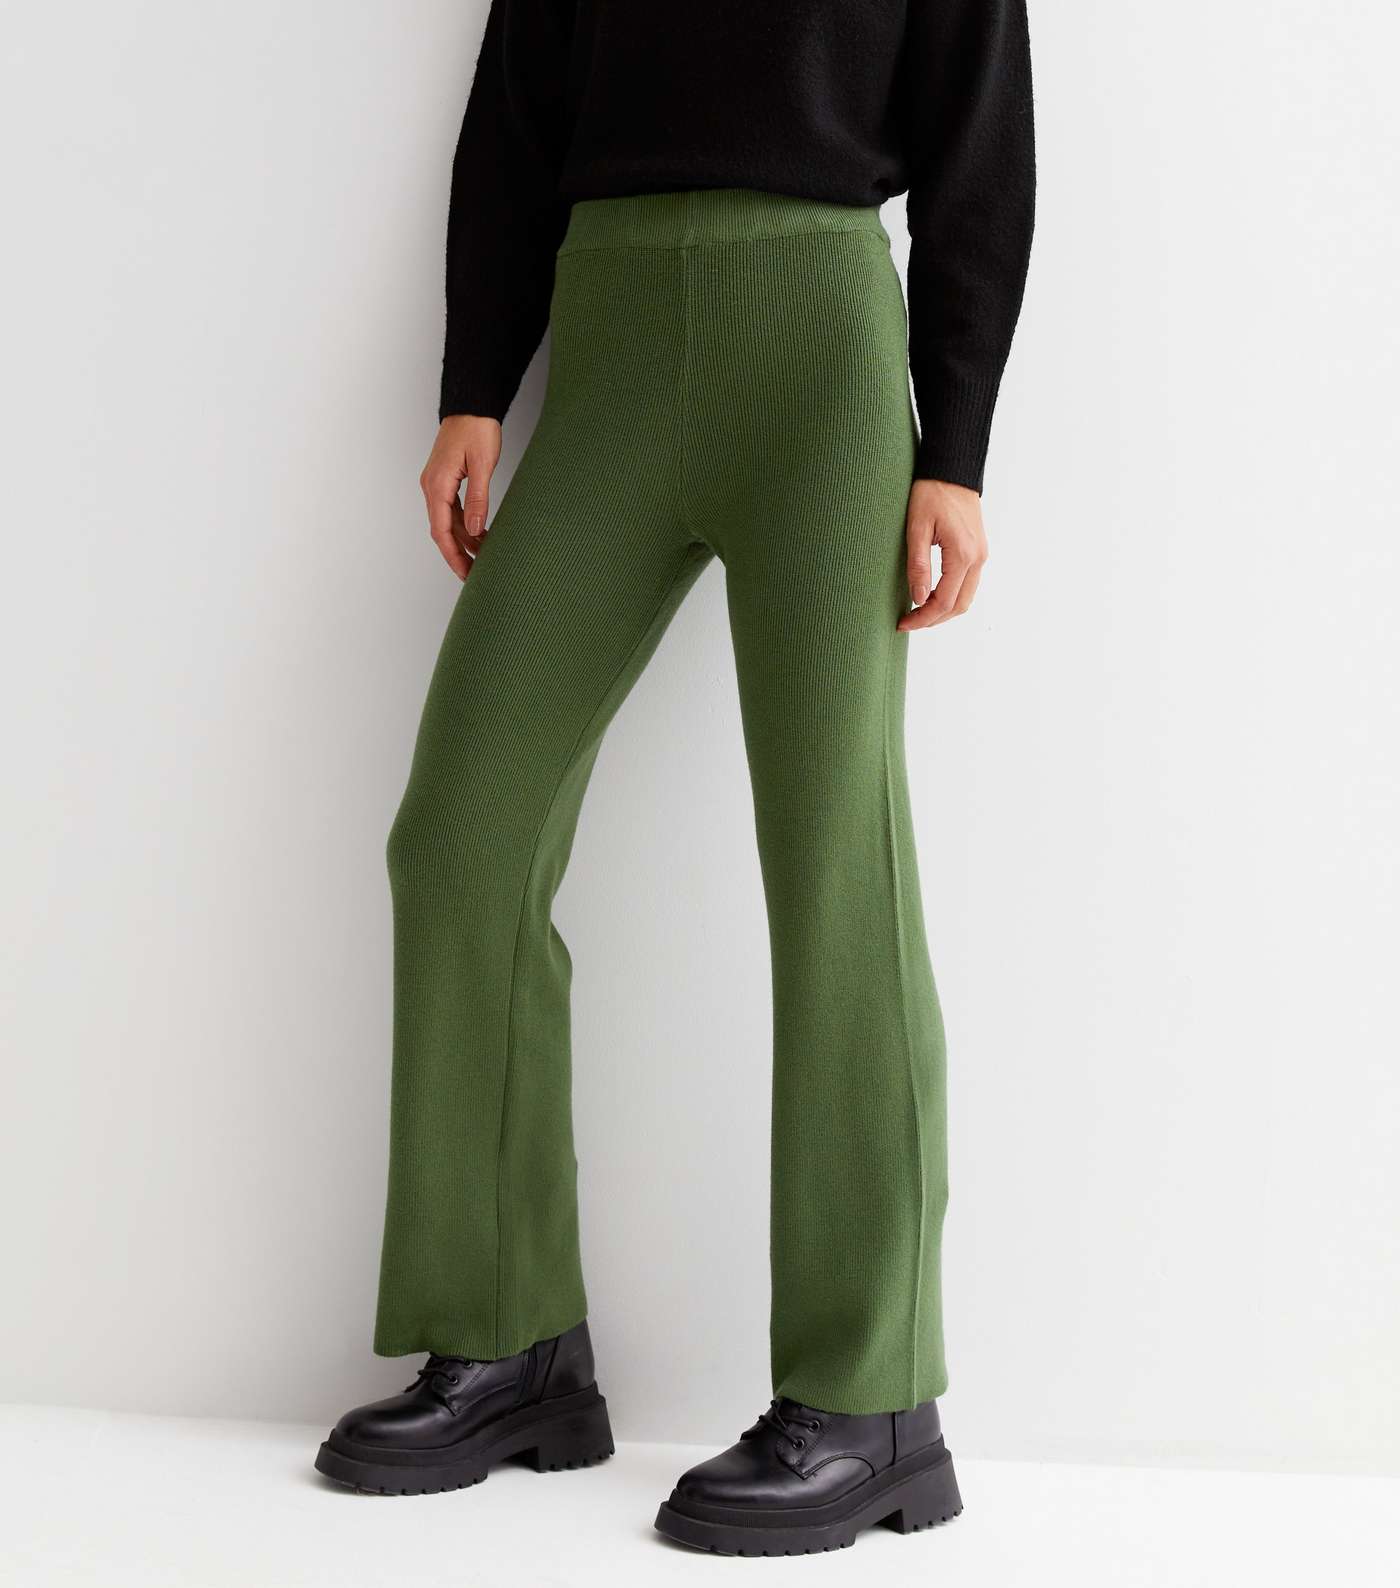 Gini London Olive Ribbed Knit High Waist Trousers Image 2